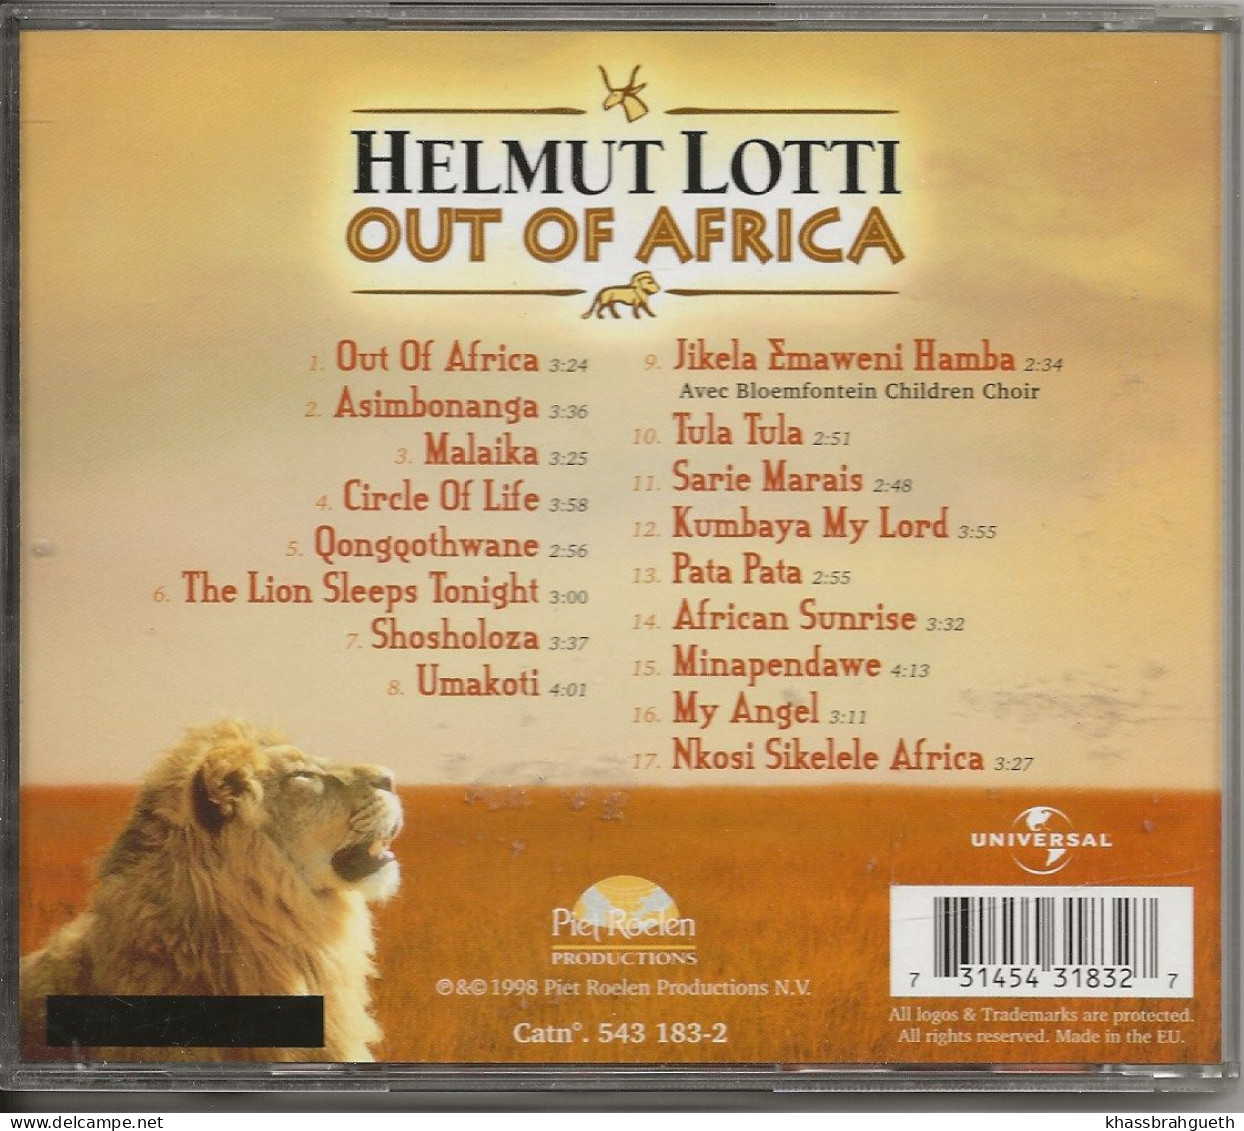 HELMUT LOTTI - OUT OF AFRICA - UNIVERSAL (1998) (CD ALBUM) - Other - English Music